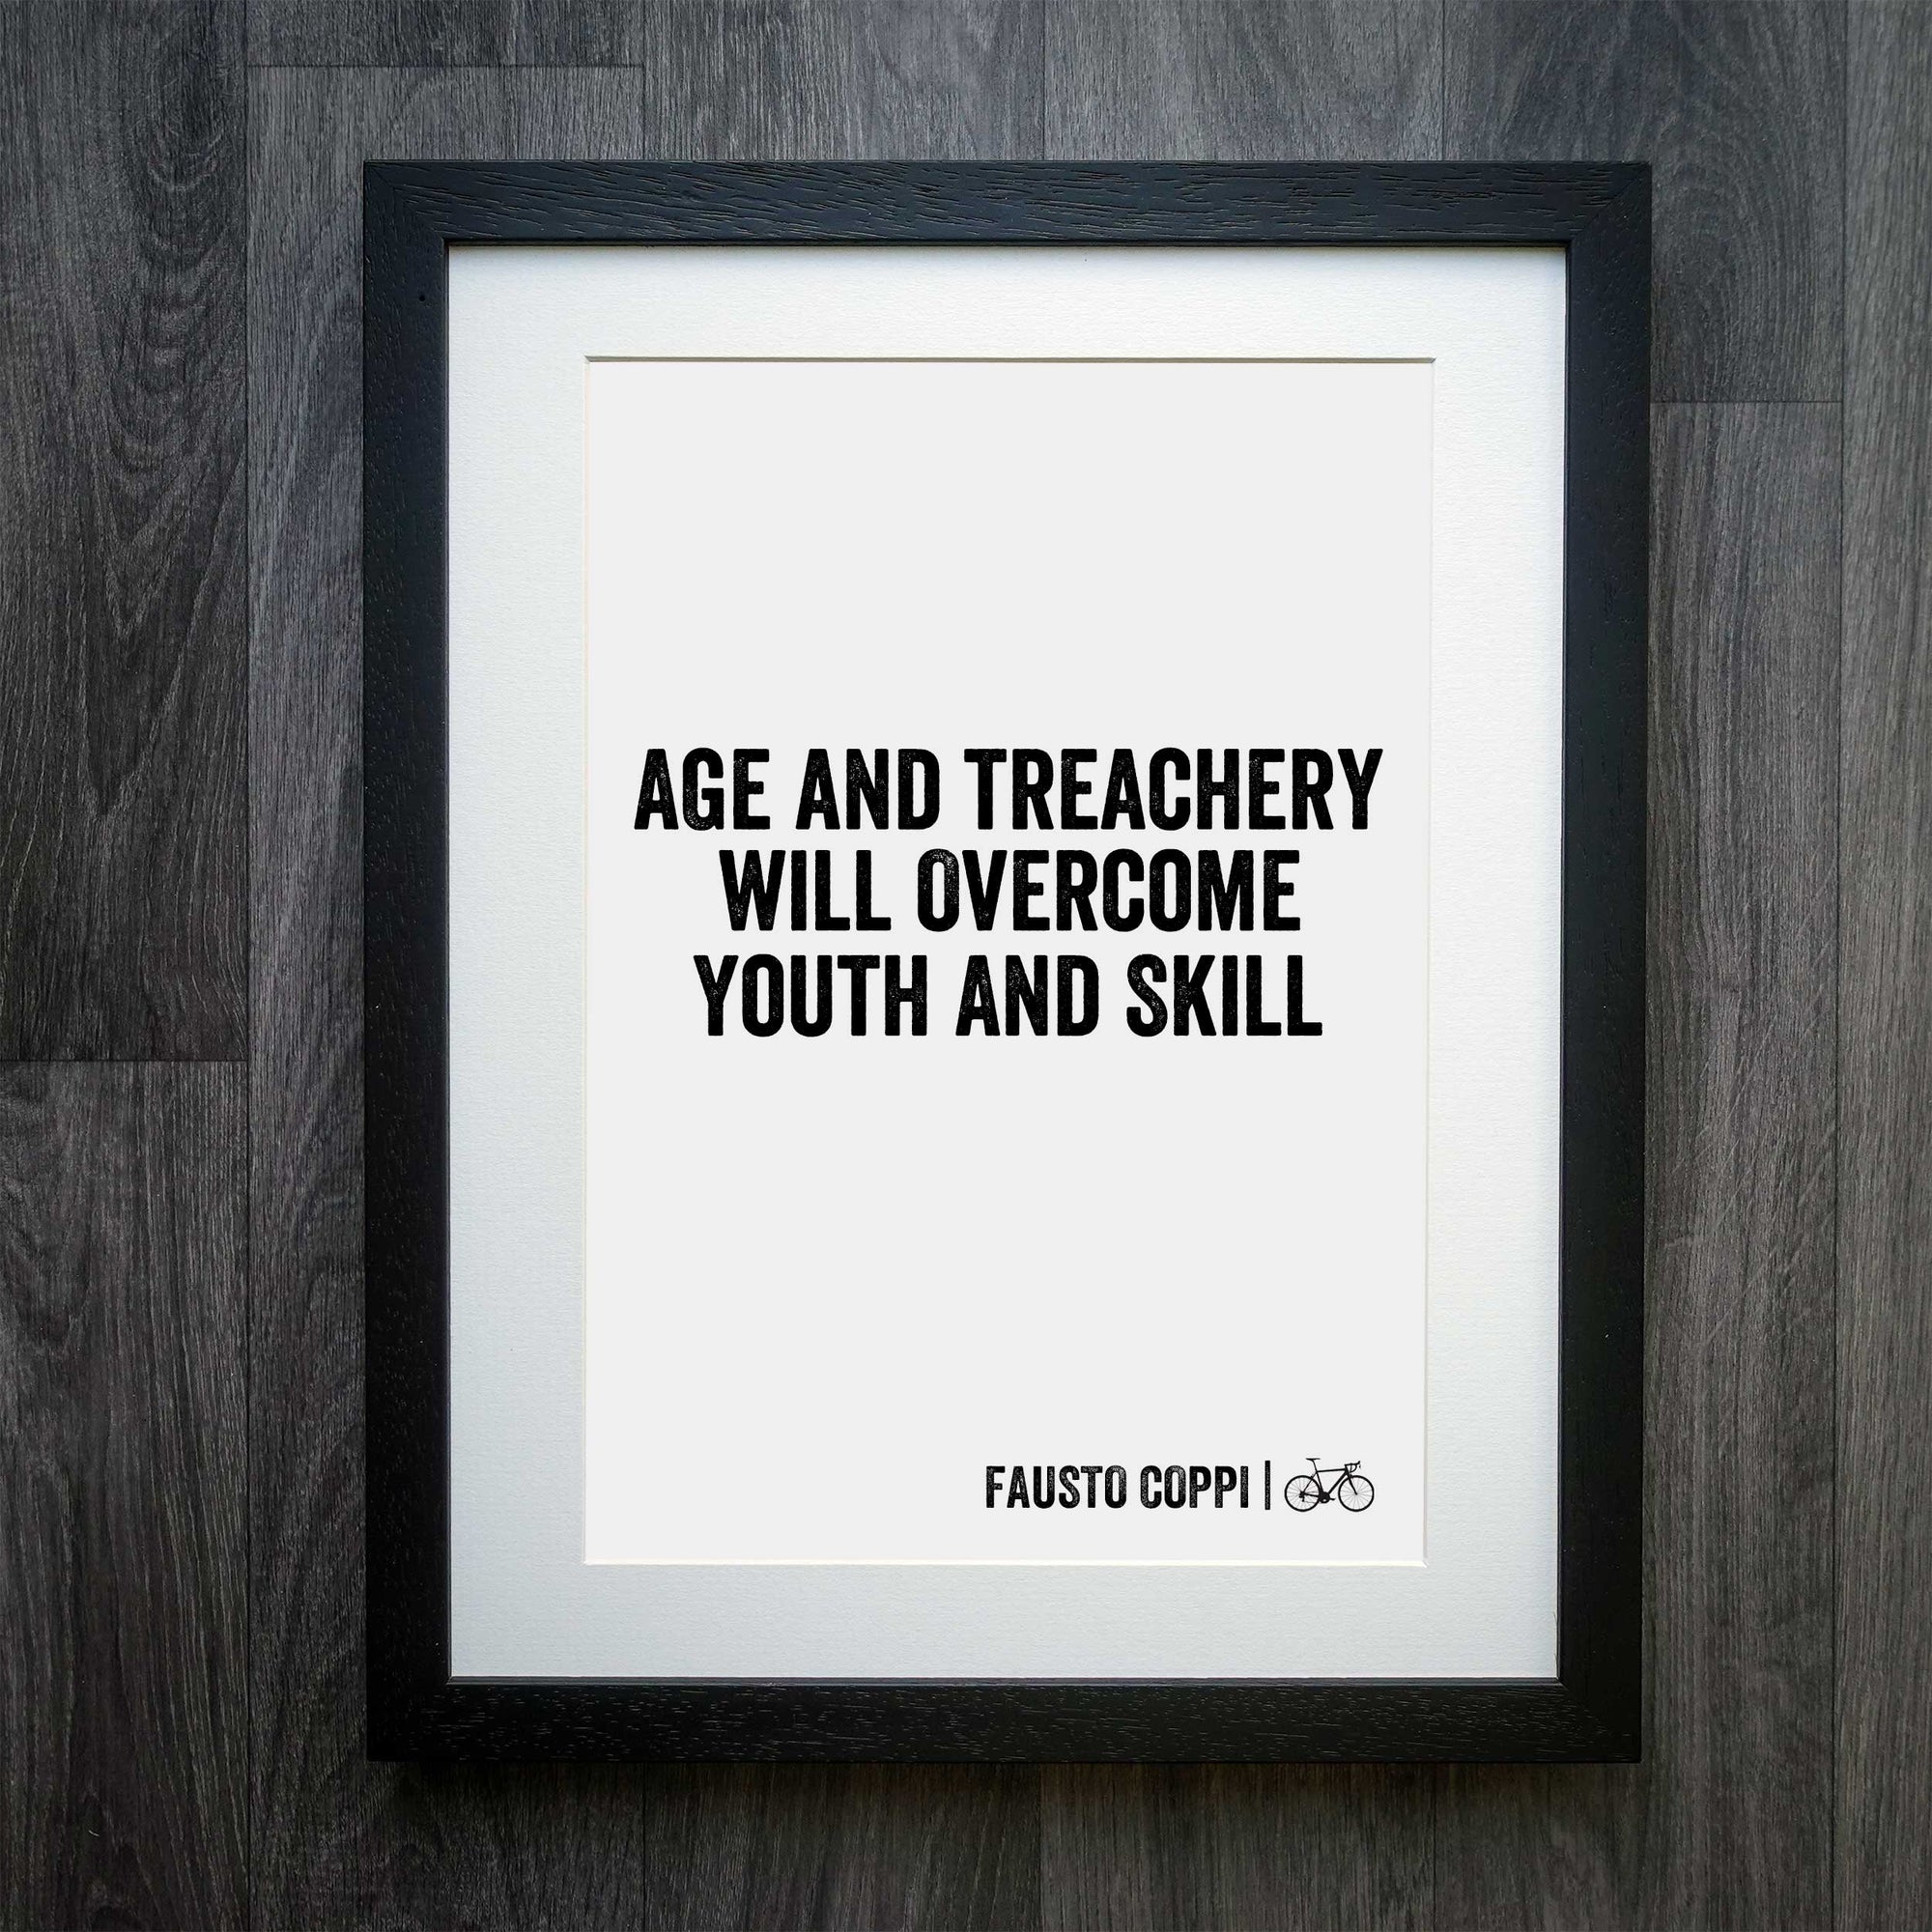 Fausto Coppi's "Age and Treachery" Inspirational Cycling Print